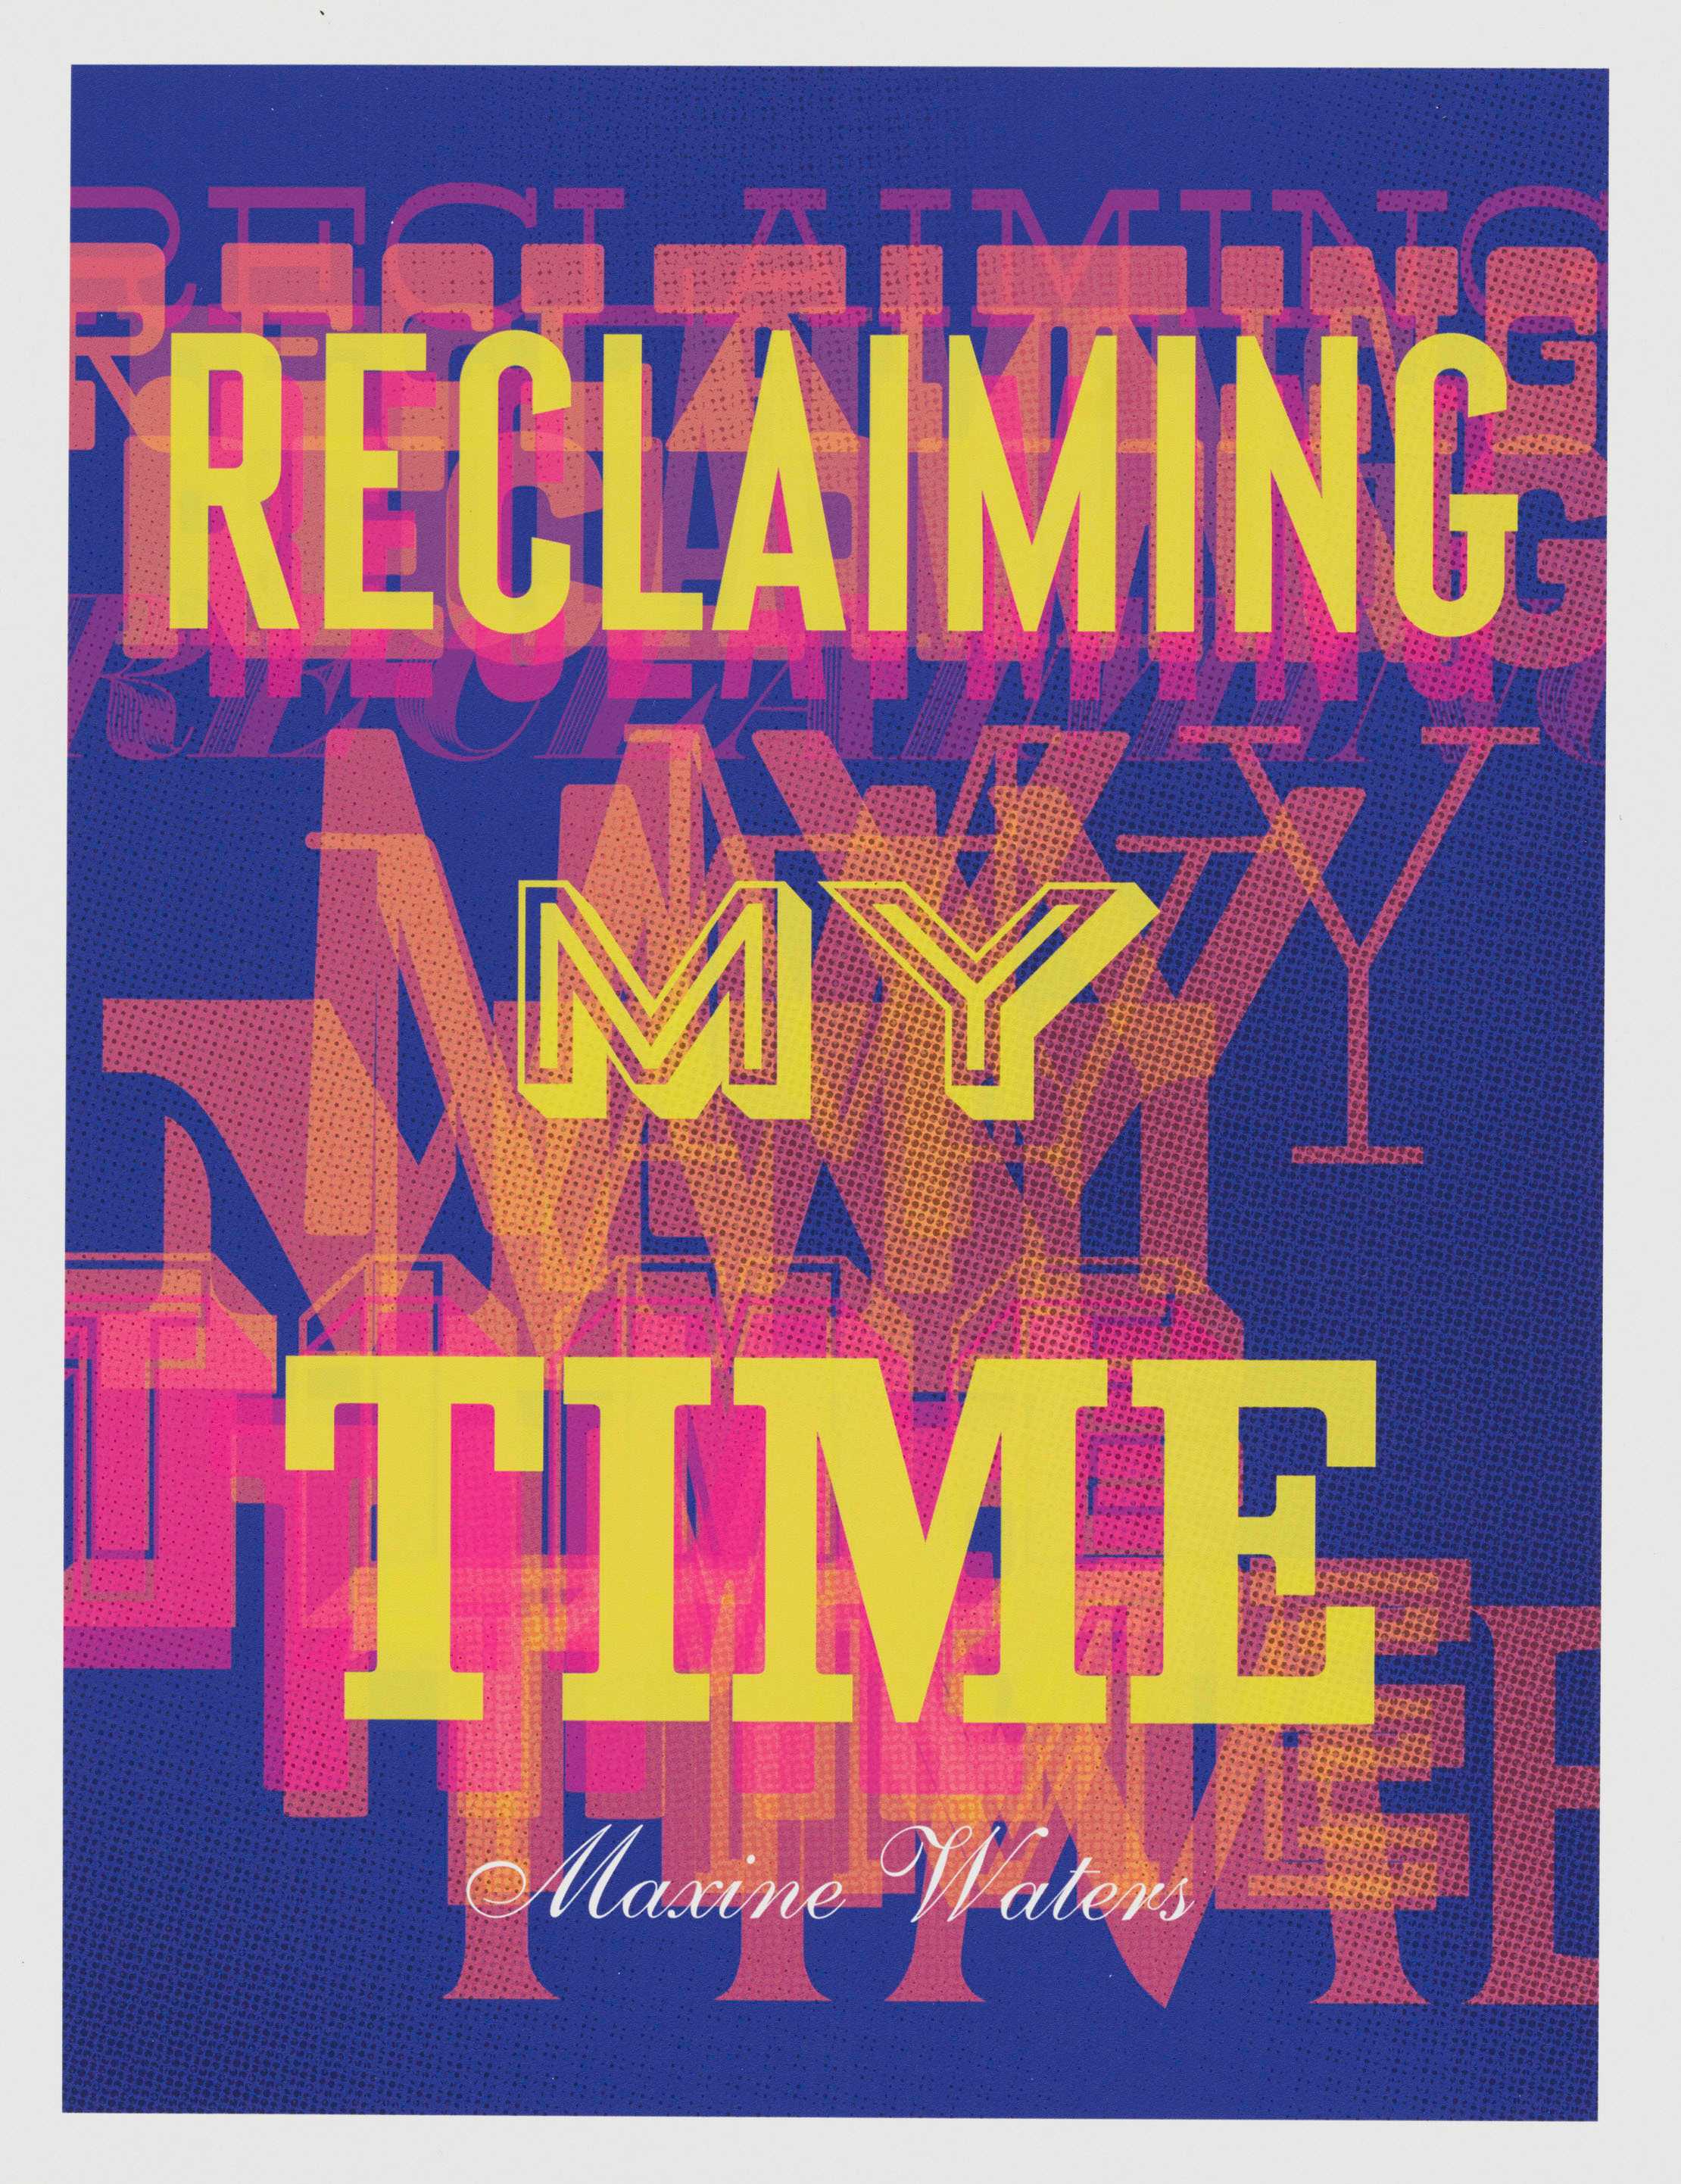 Graphic poster with a stylized overlay text saying "reclaiming my time" with the name "maxine waters" below.